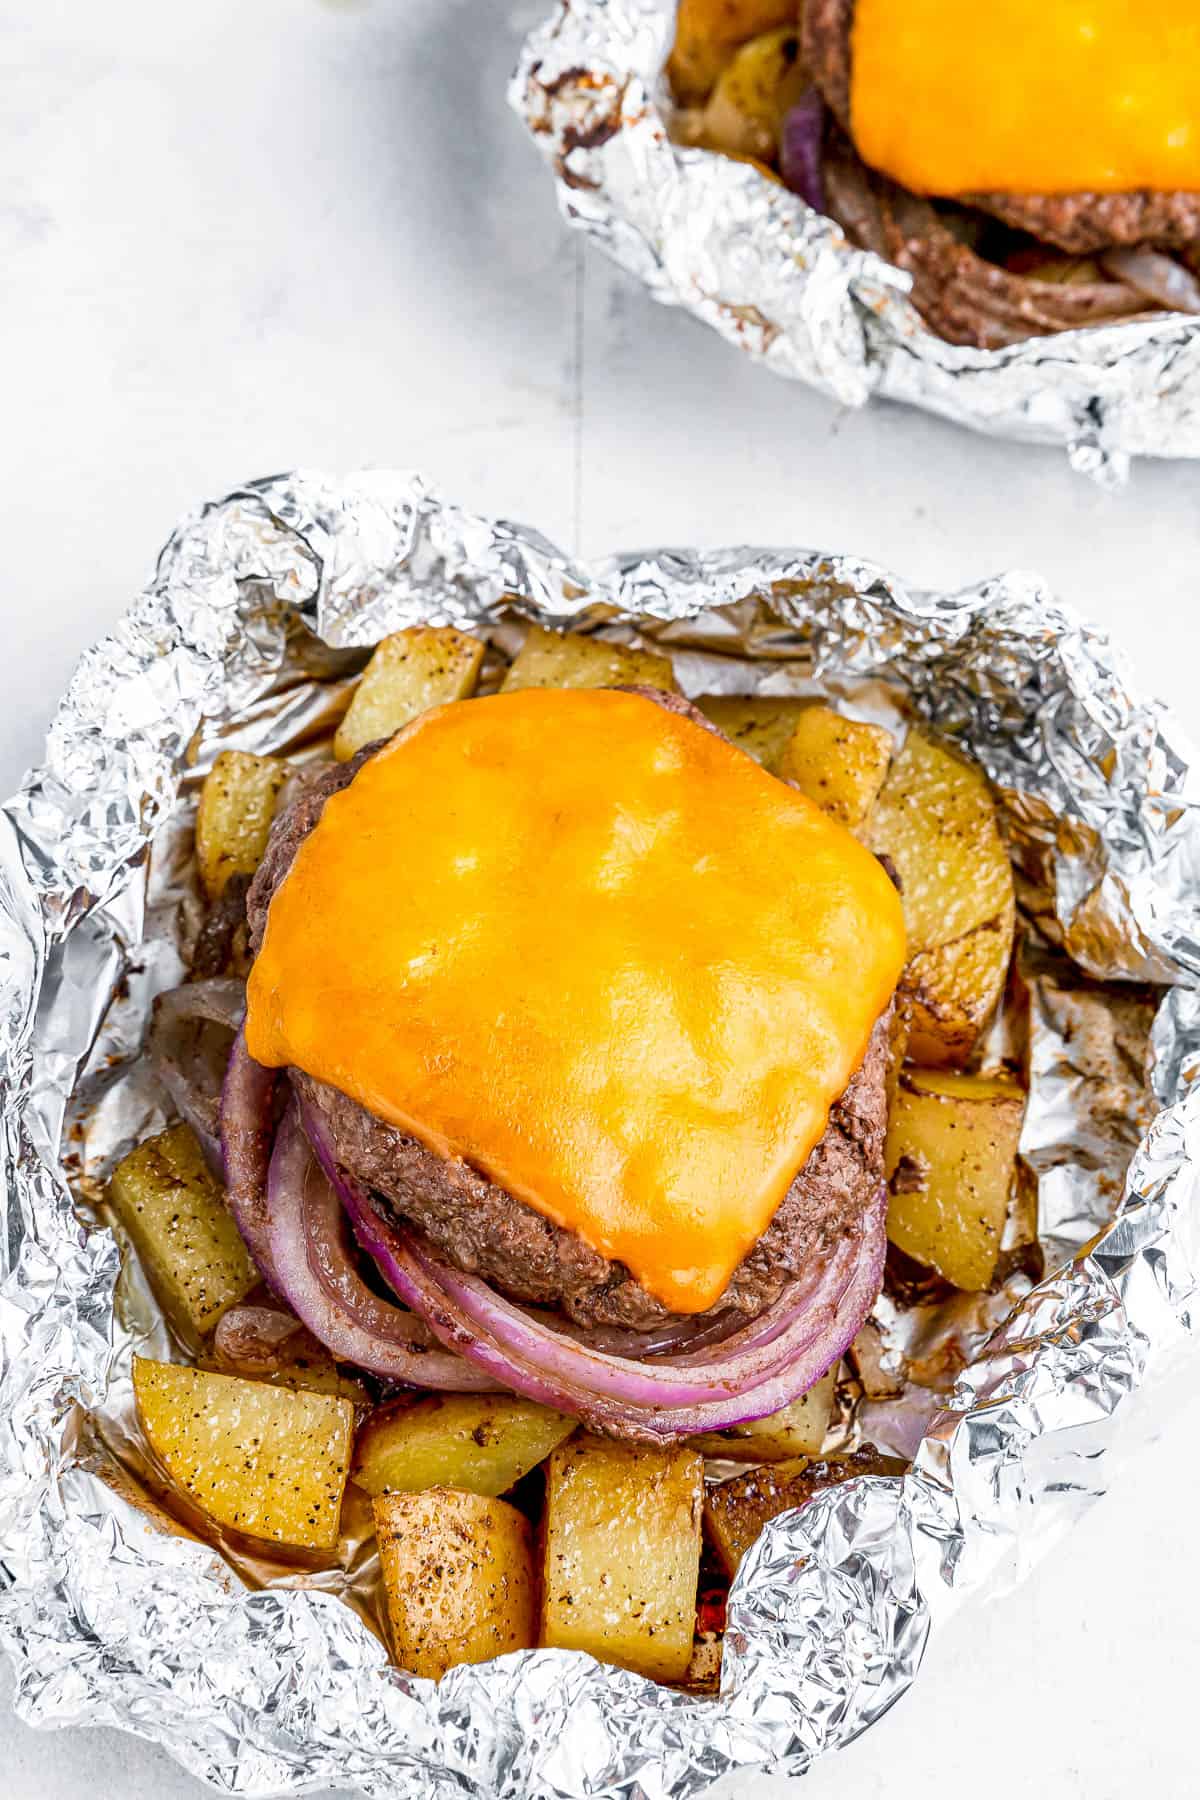 Two cheeseburgers in foil with potatoes